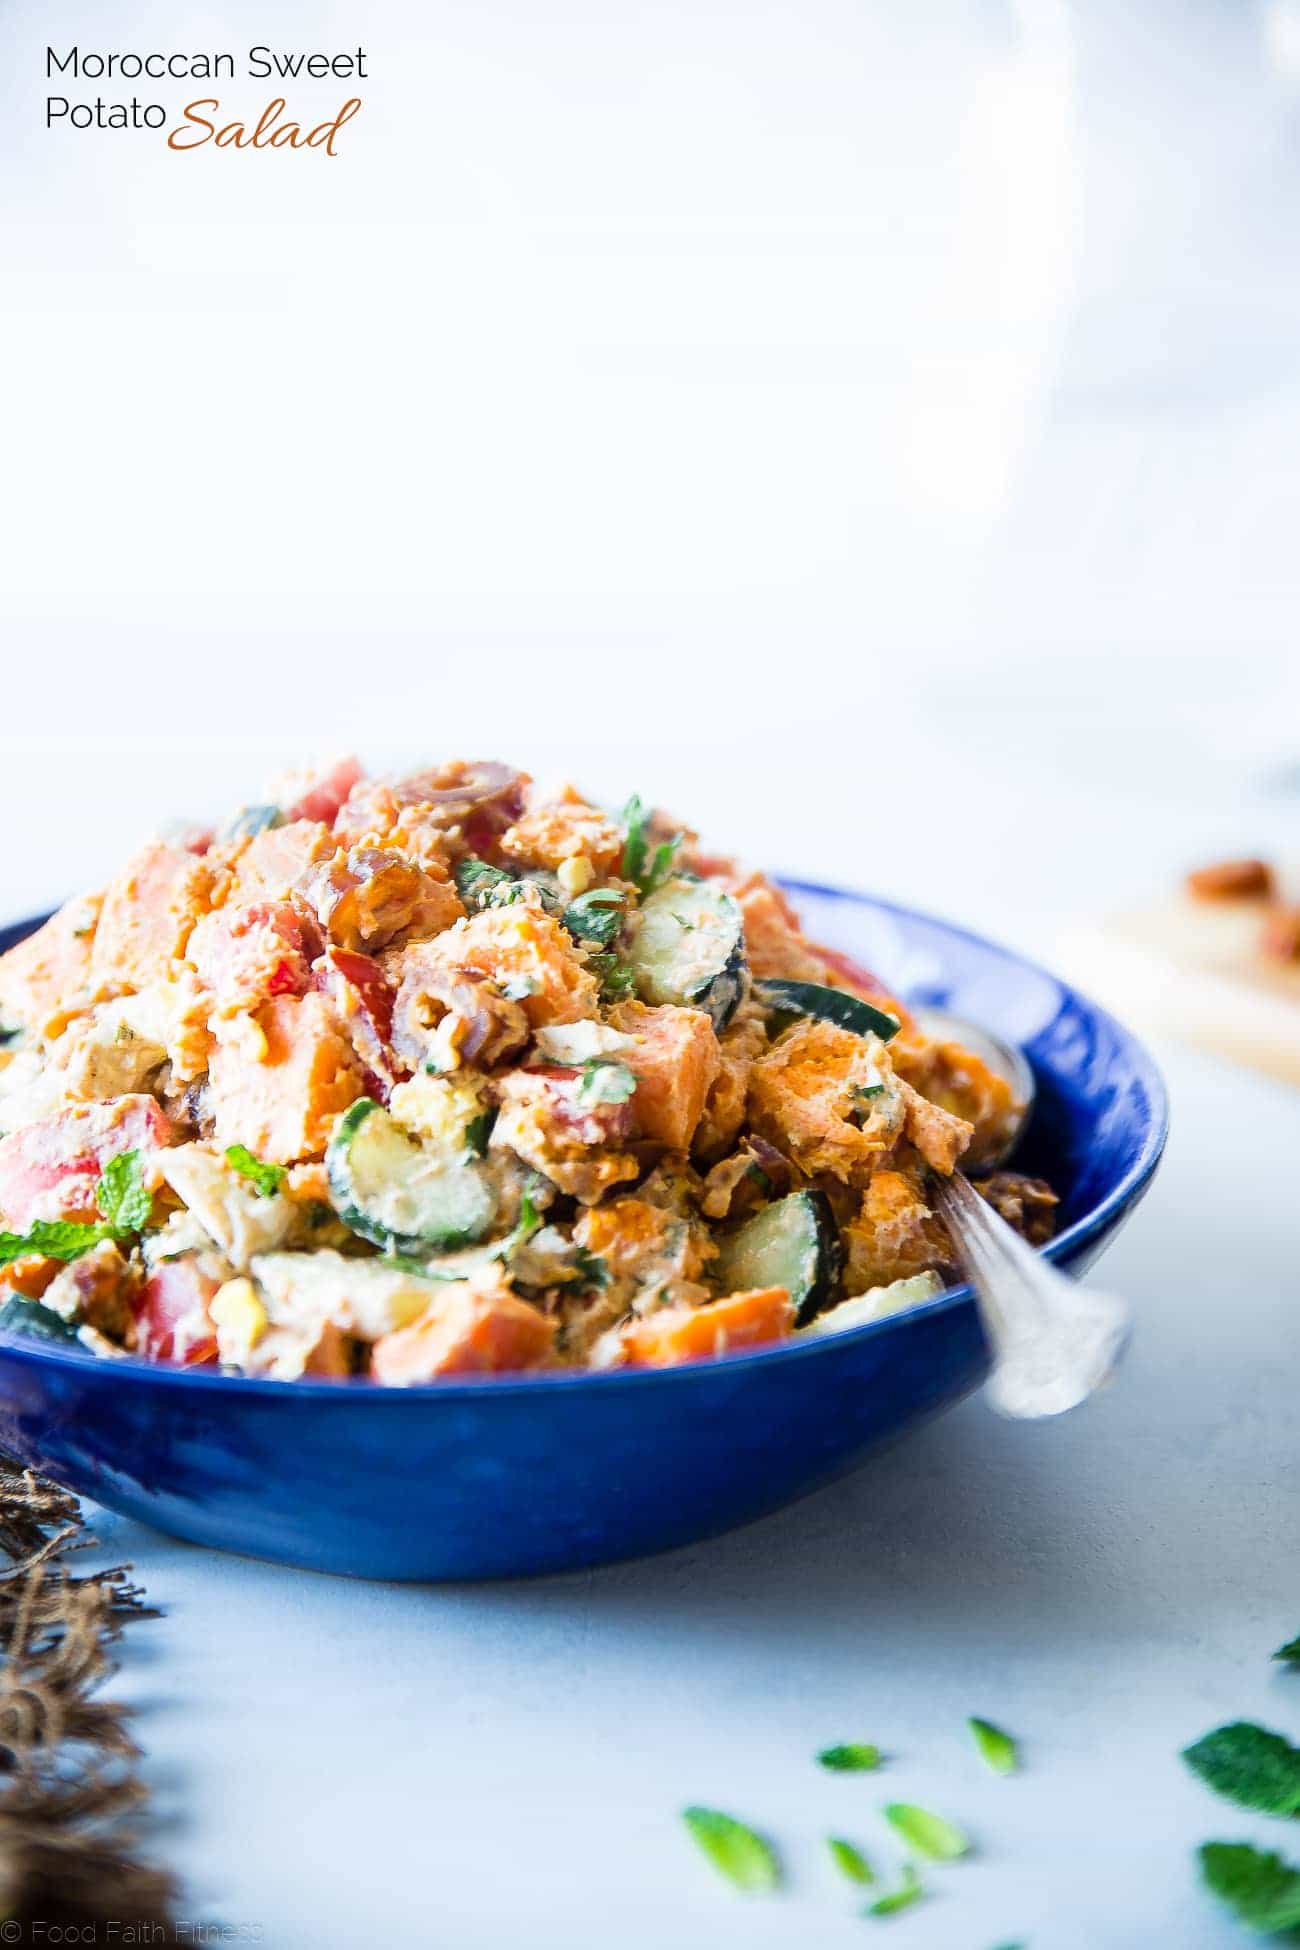 Whole30 Moroccan Sweet Potato Salad - This easy paleo Moroccan Sweet Potato Salad is loaded with the spicy-sweet flavor of the Middle-East! It's a healthy, dairy-free summer side dish with a vegan option! | Foodfaithfitness.com | @FoodFaithFit